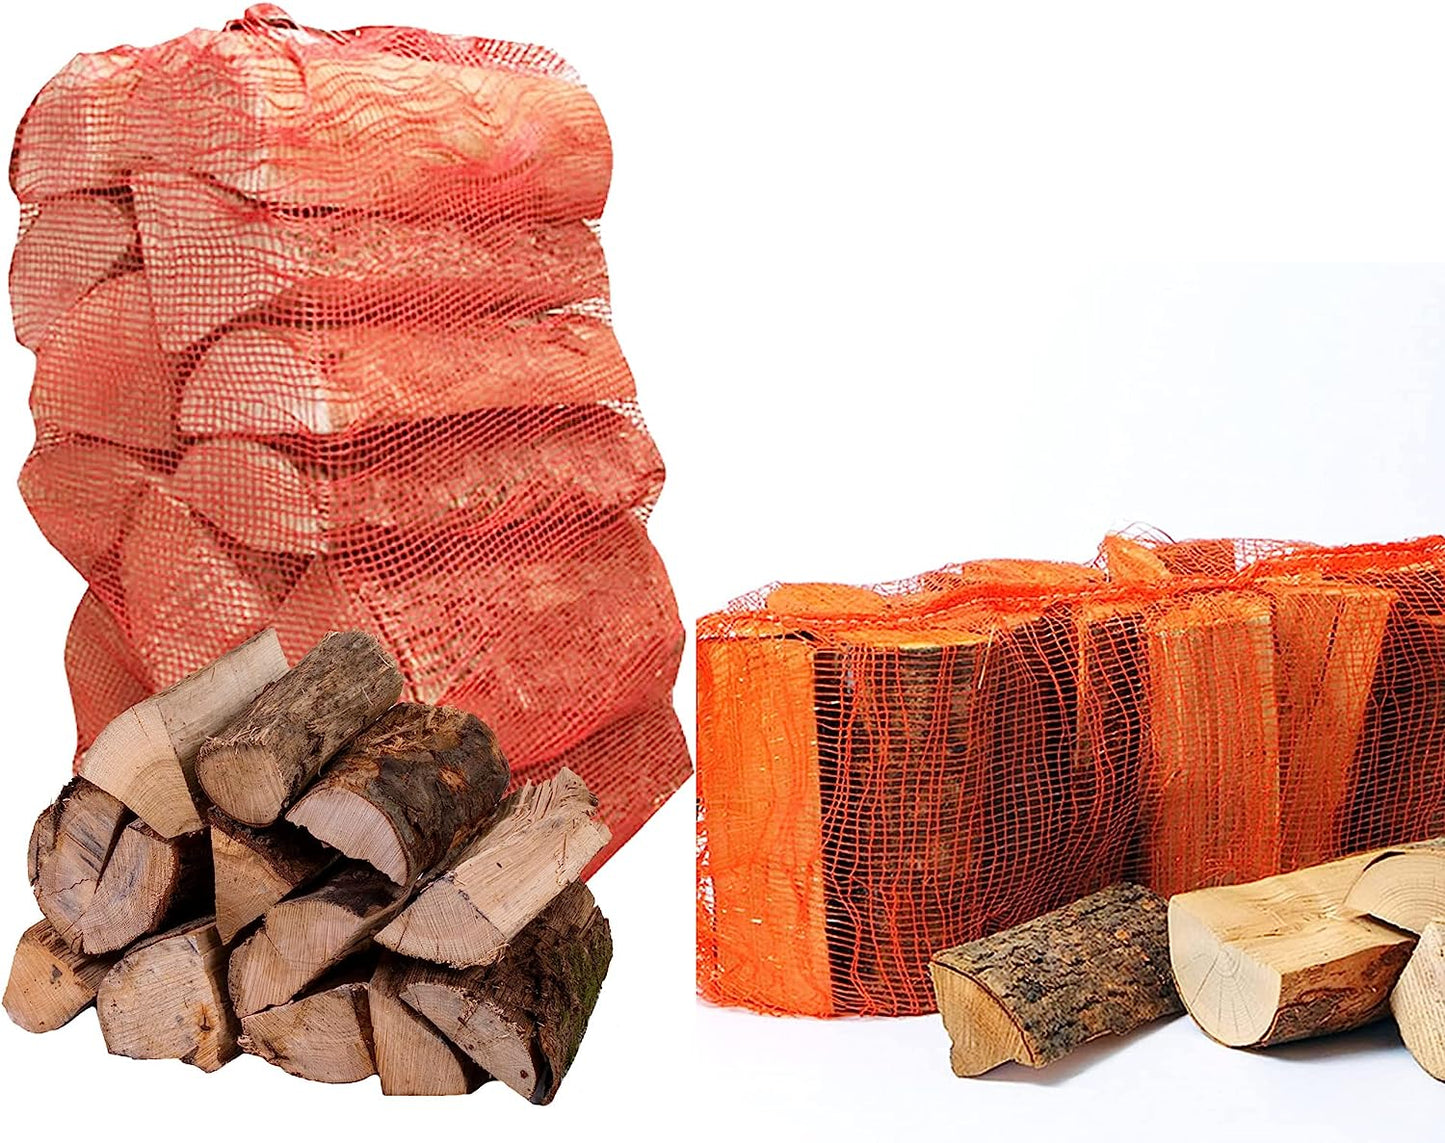 30 Litre Dried Fire Log Birch Wood Hard Wood Kiln For Fireplaces & Fire Pits